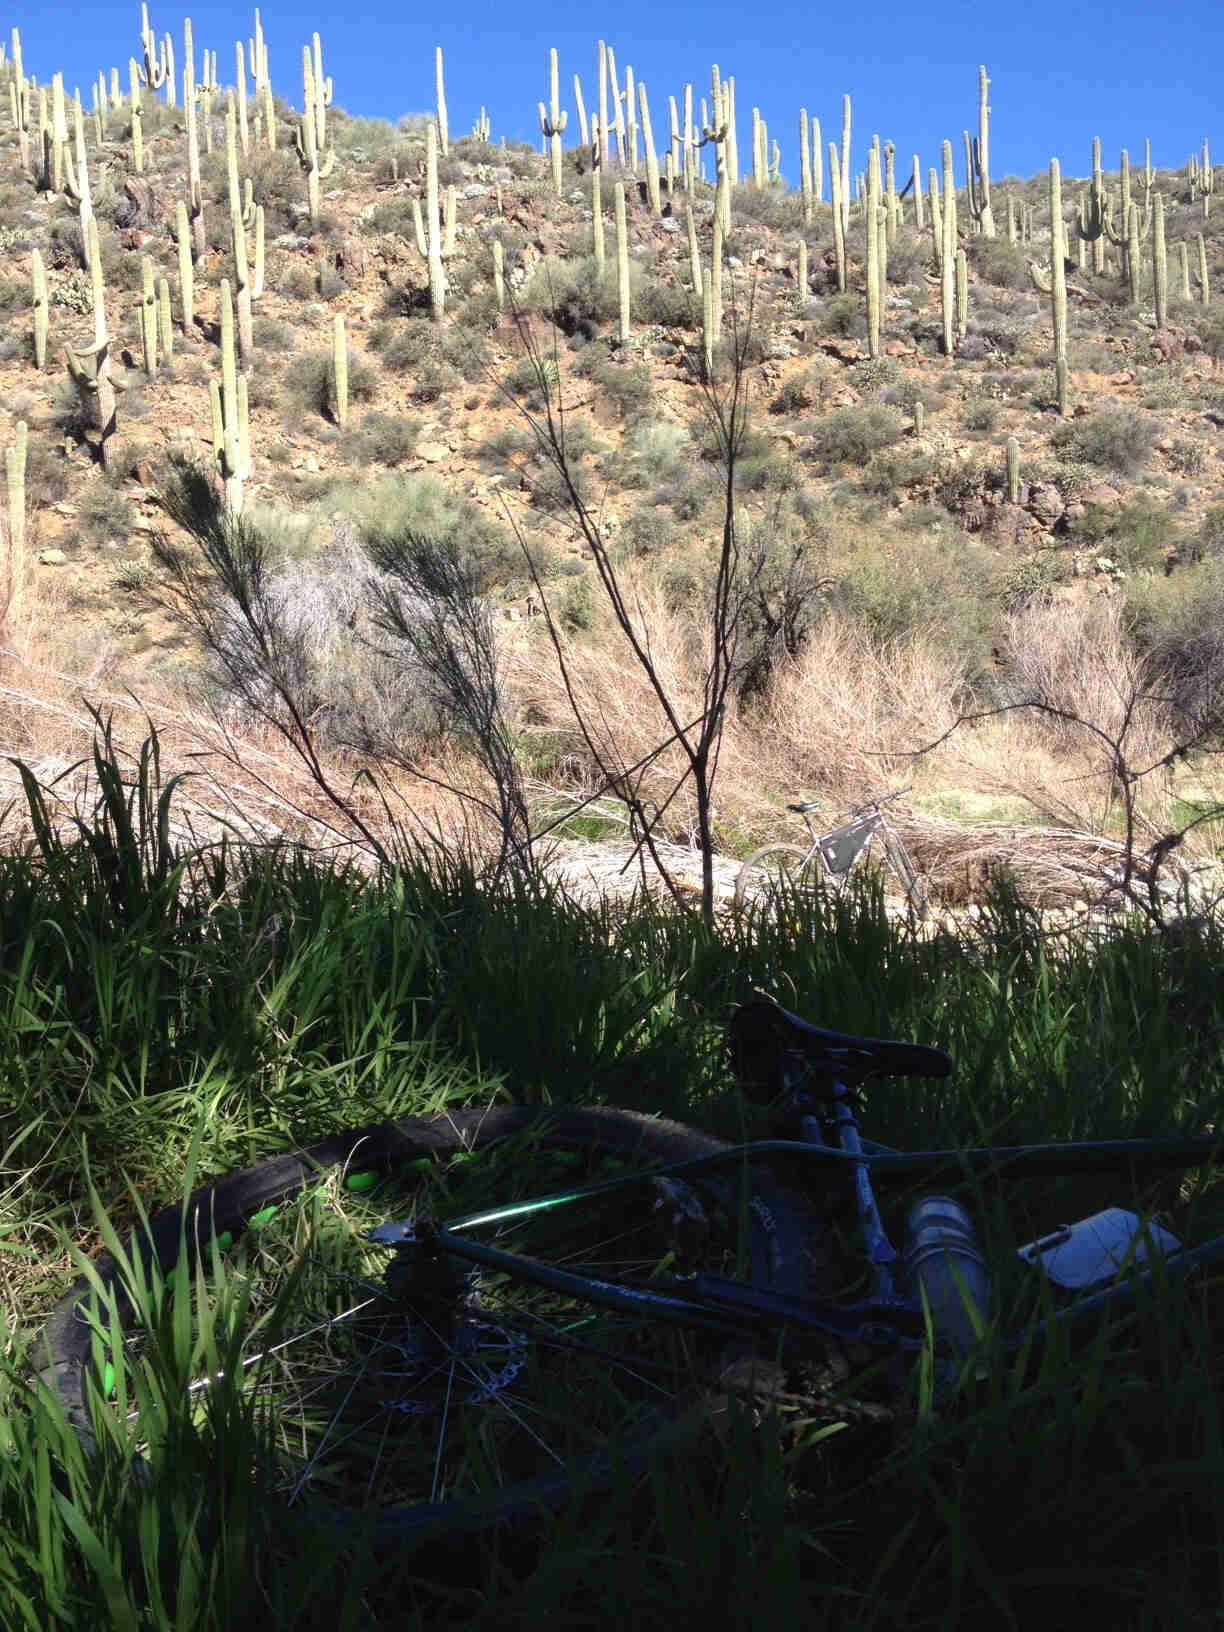 Downward, right side view of the back of a Surly fat bike, laying in tall grass, at the base of a cactus covered hill